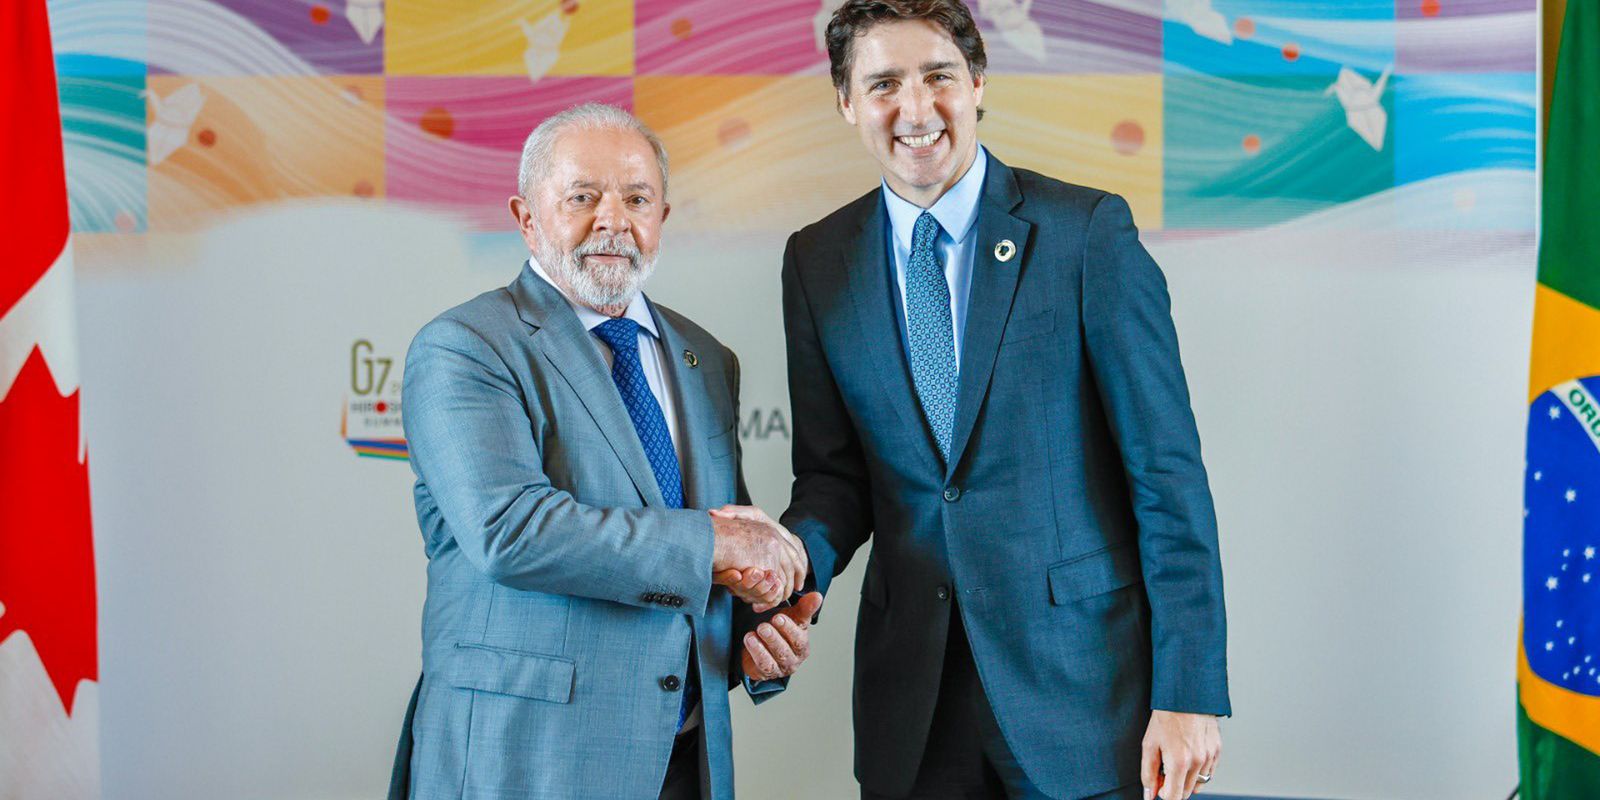 Together with the Canadian Prime Minister, Lula spoke about the environment, trade and Ukraine